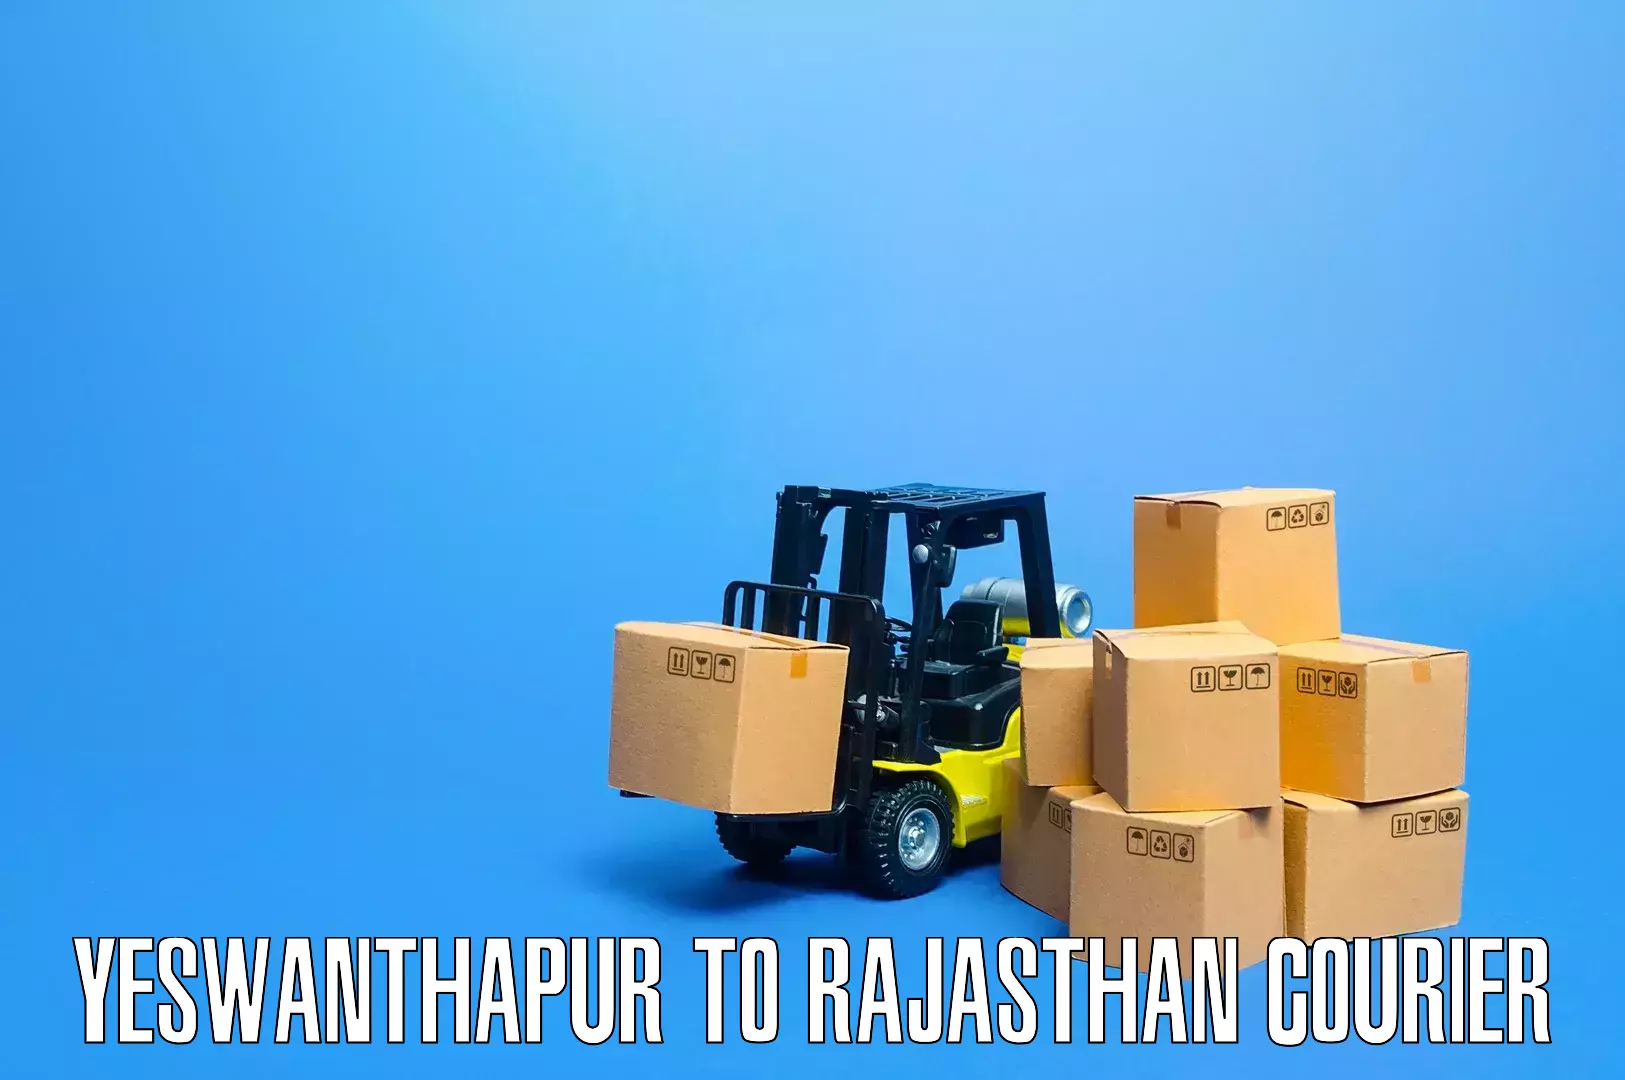 Budget-friendly movers Yeswanthapur to Bhilwara